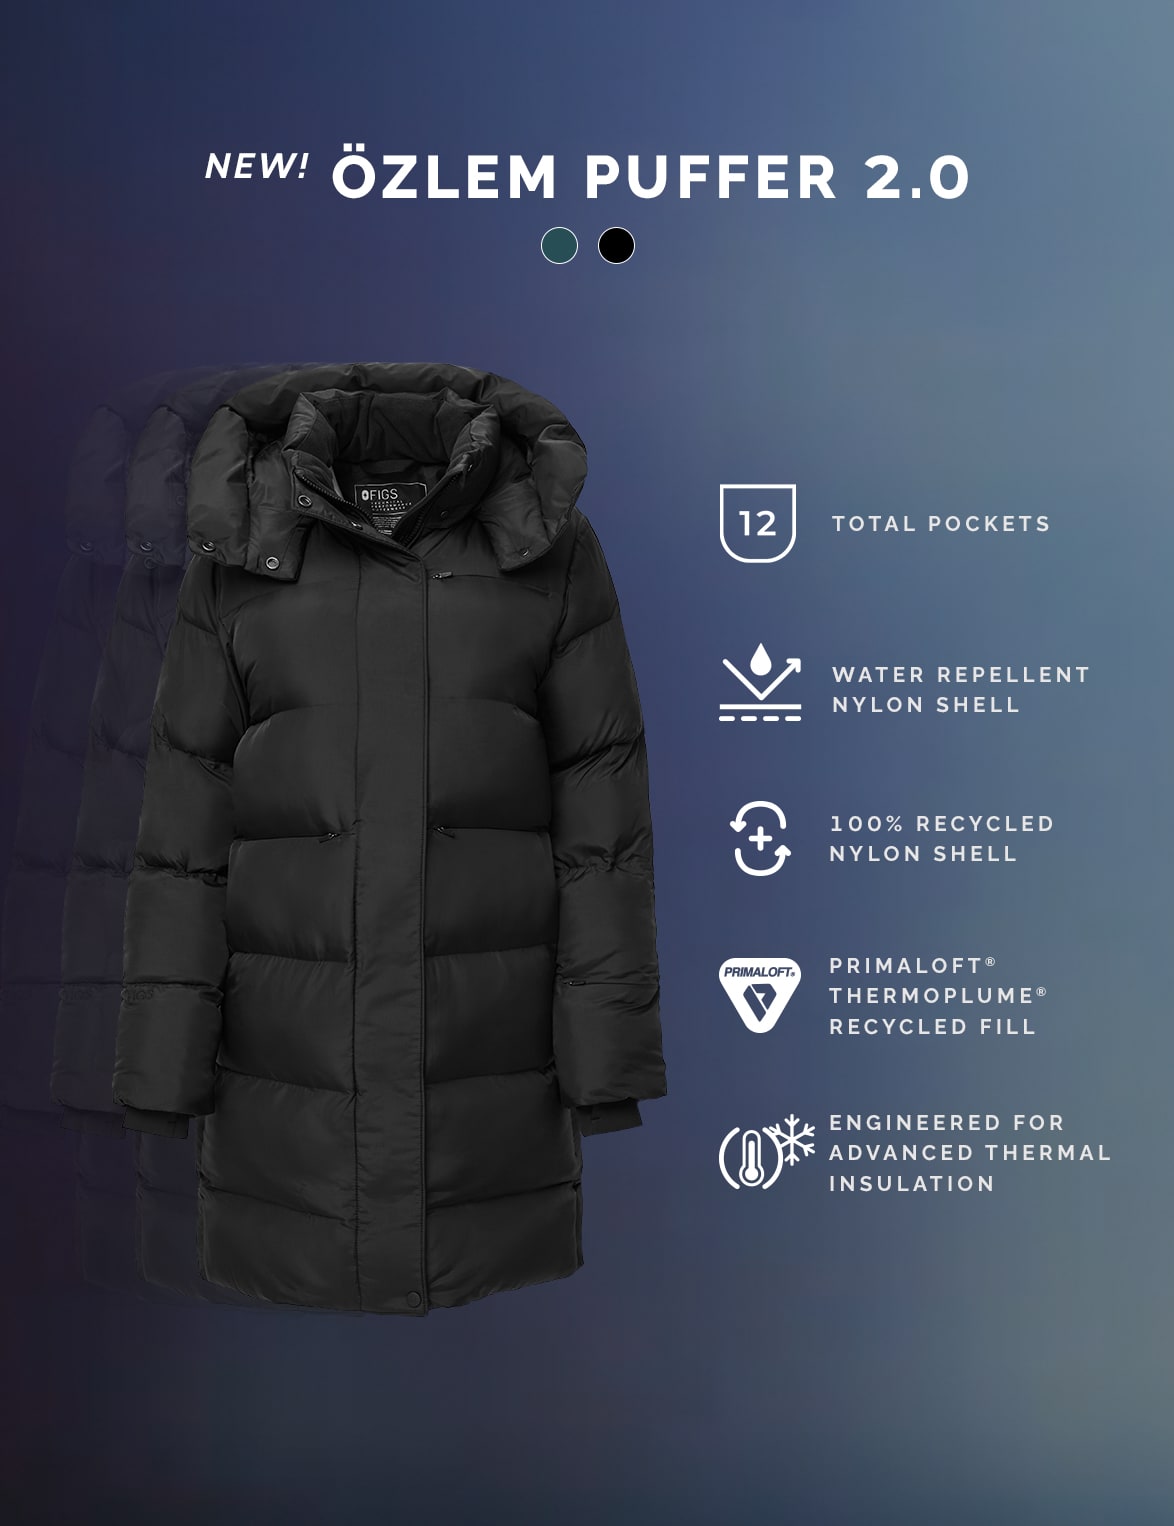 APP EXCLUSIVE: ÖZLEM PUFFER 2.0 — Built for advanced thermal regulation with tons of new features, available only in the NEW FIGS App!